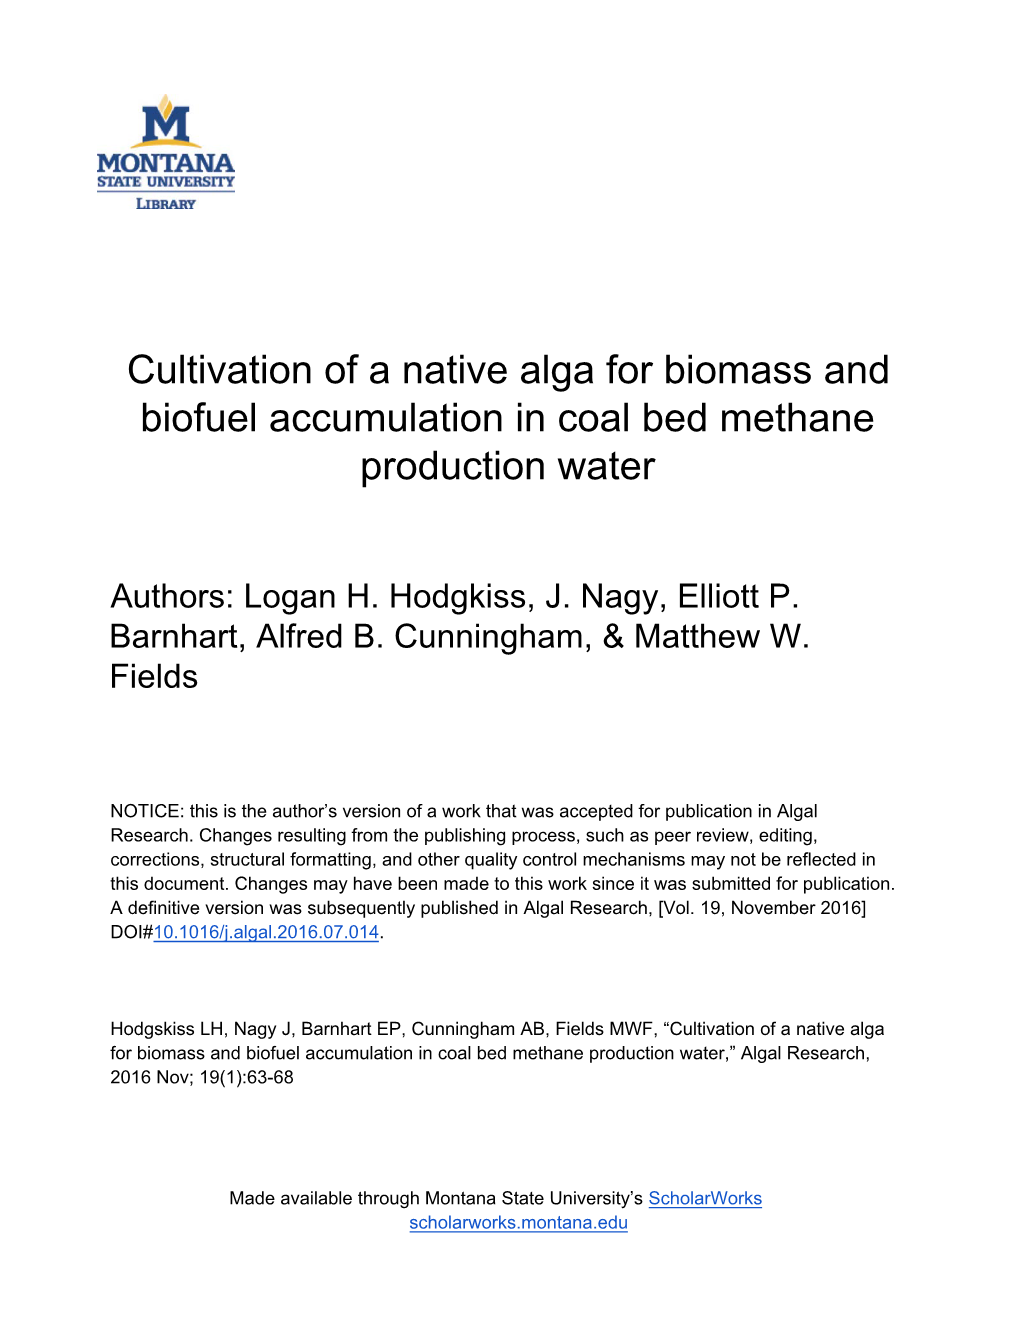 Cultivation of a Native Alga for Biomass and Biofuel Accumulation in Coal Bed Methane Production Water